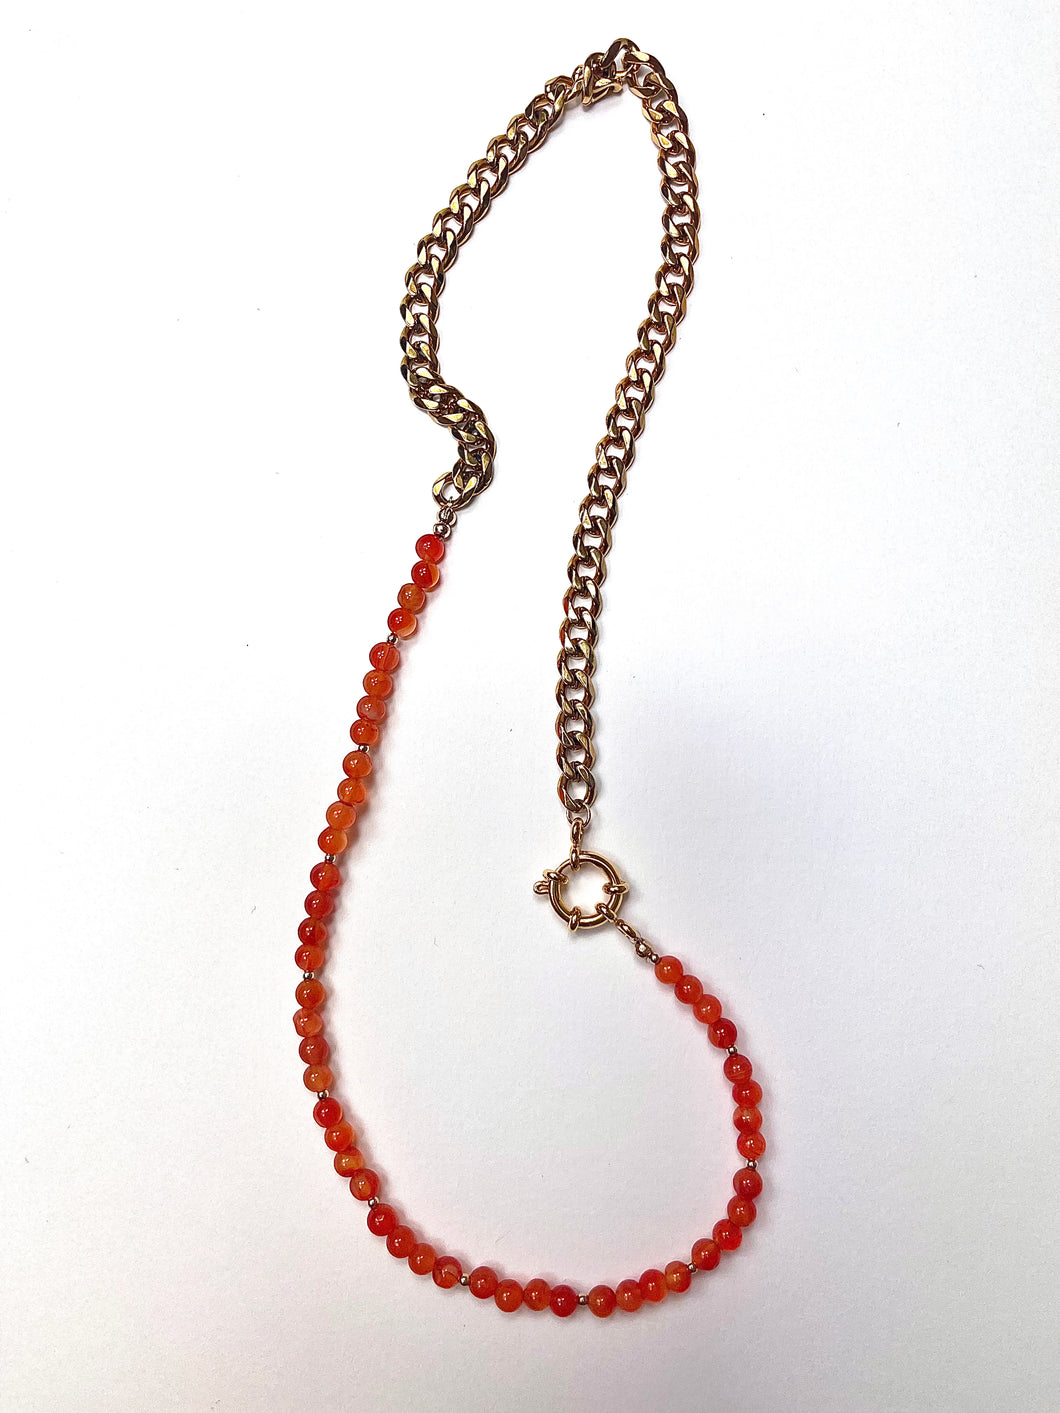 Carnelian 14K Plated Necklace - Made to order